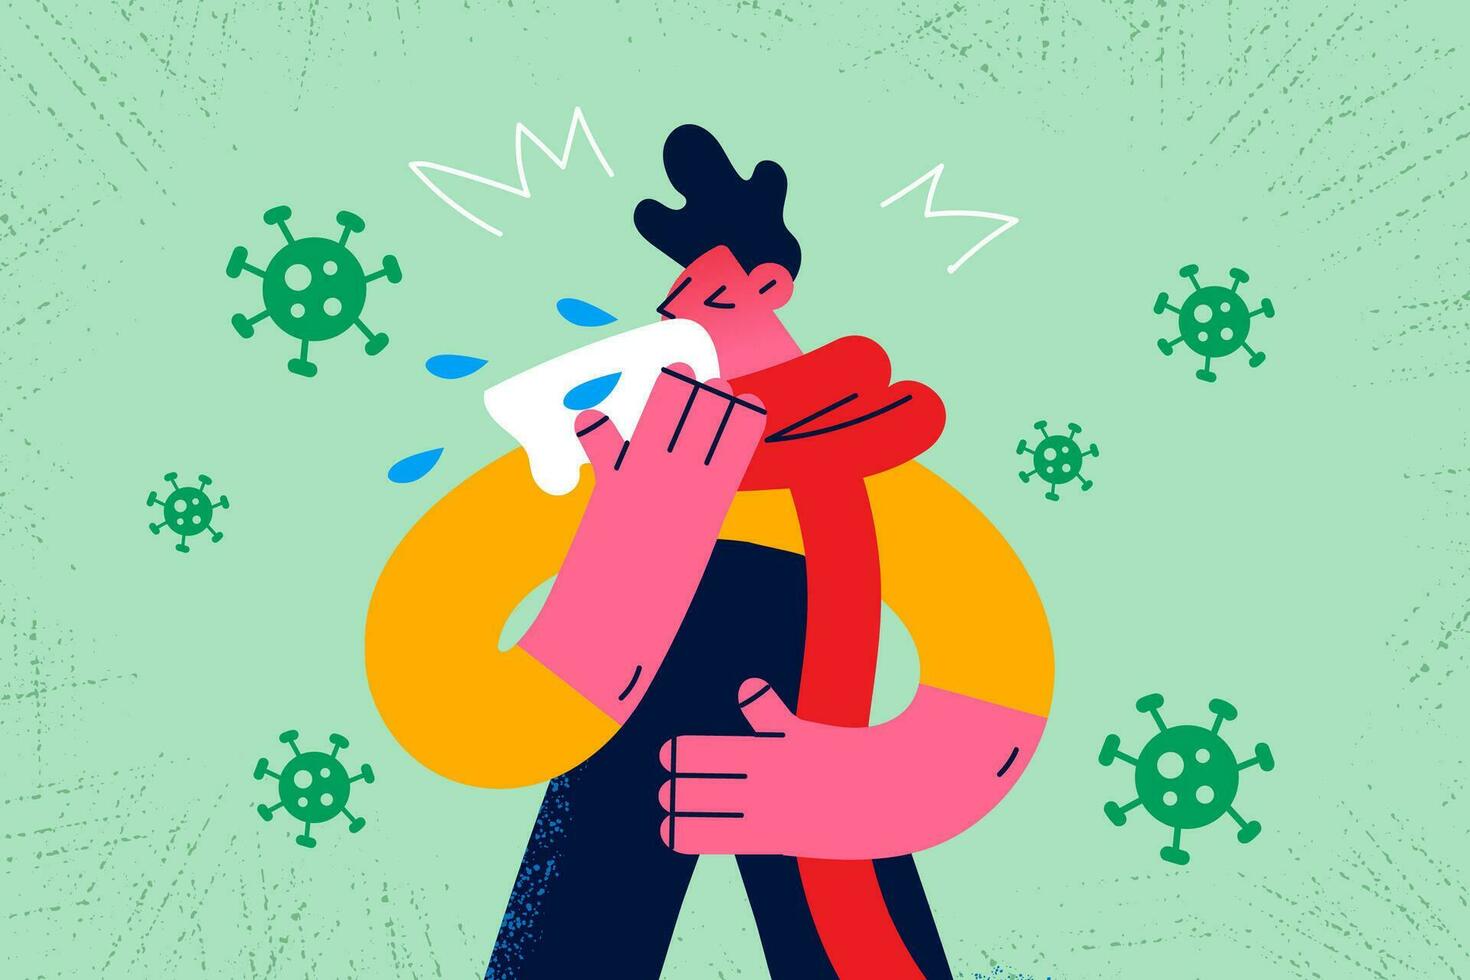 Sick young man blow running nose feel unhealthy suffer from covid-19 symptoms. Ill guy have fever or cold, struggle with corona virus infection. Coronavirus, pandemics concept. Vector illustration.